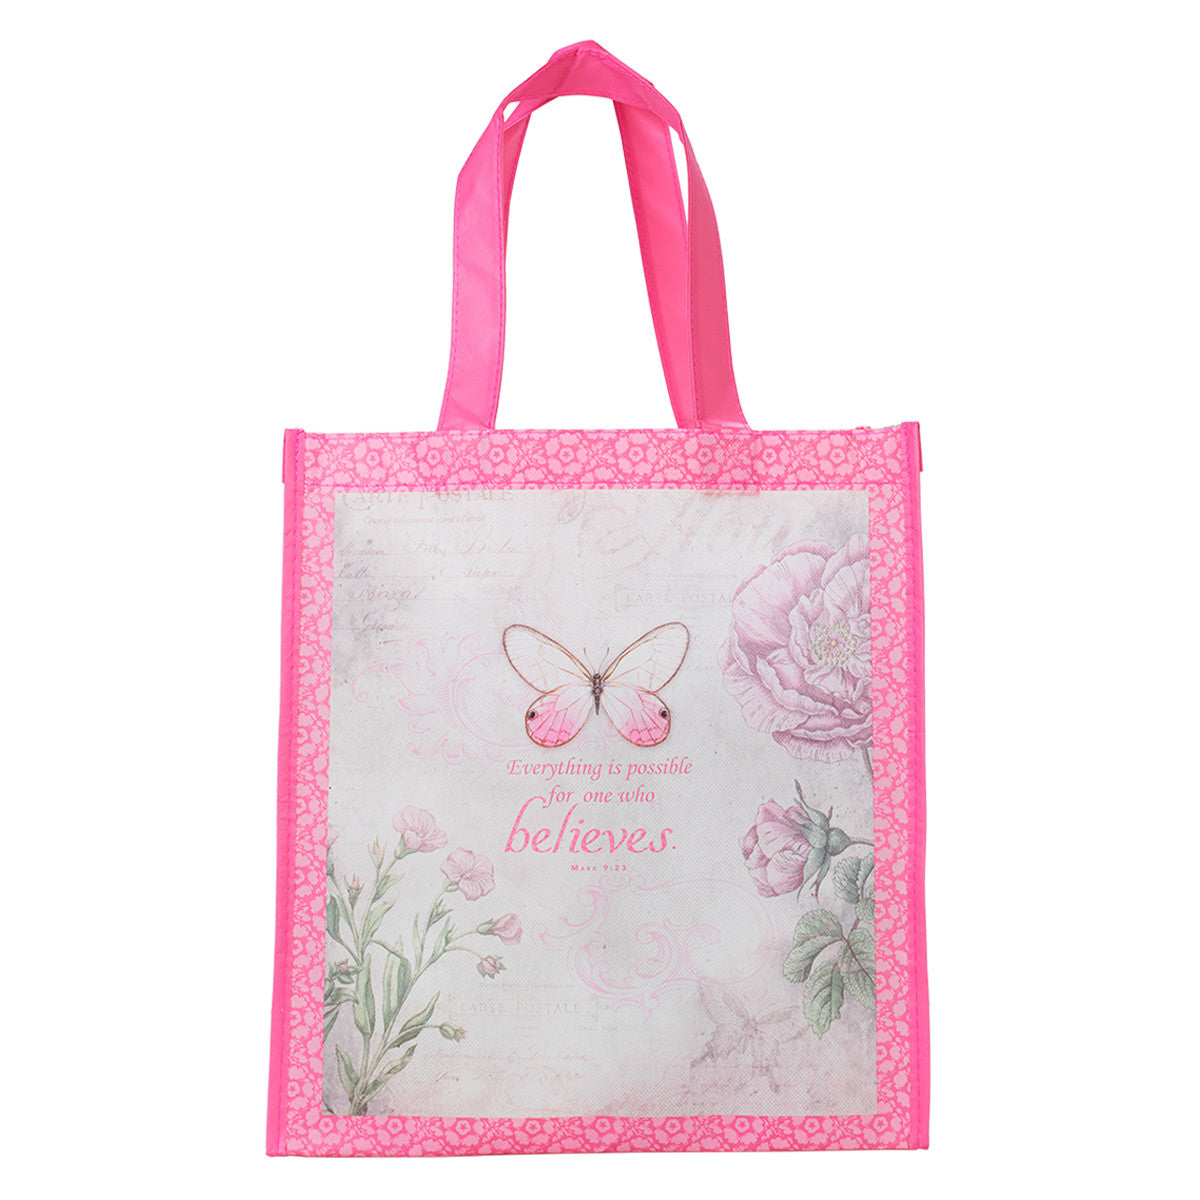 Image of Believe Shopper Bag other